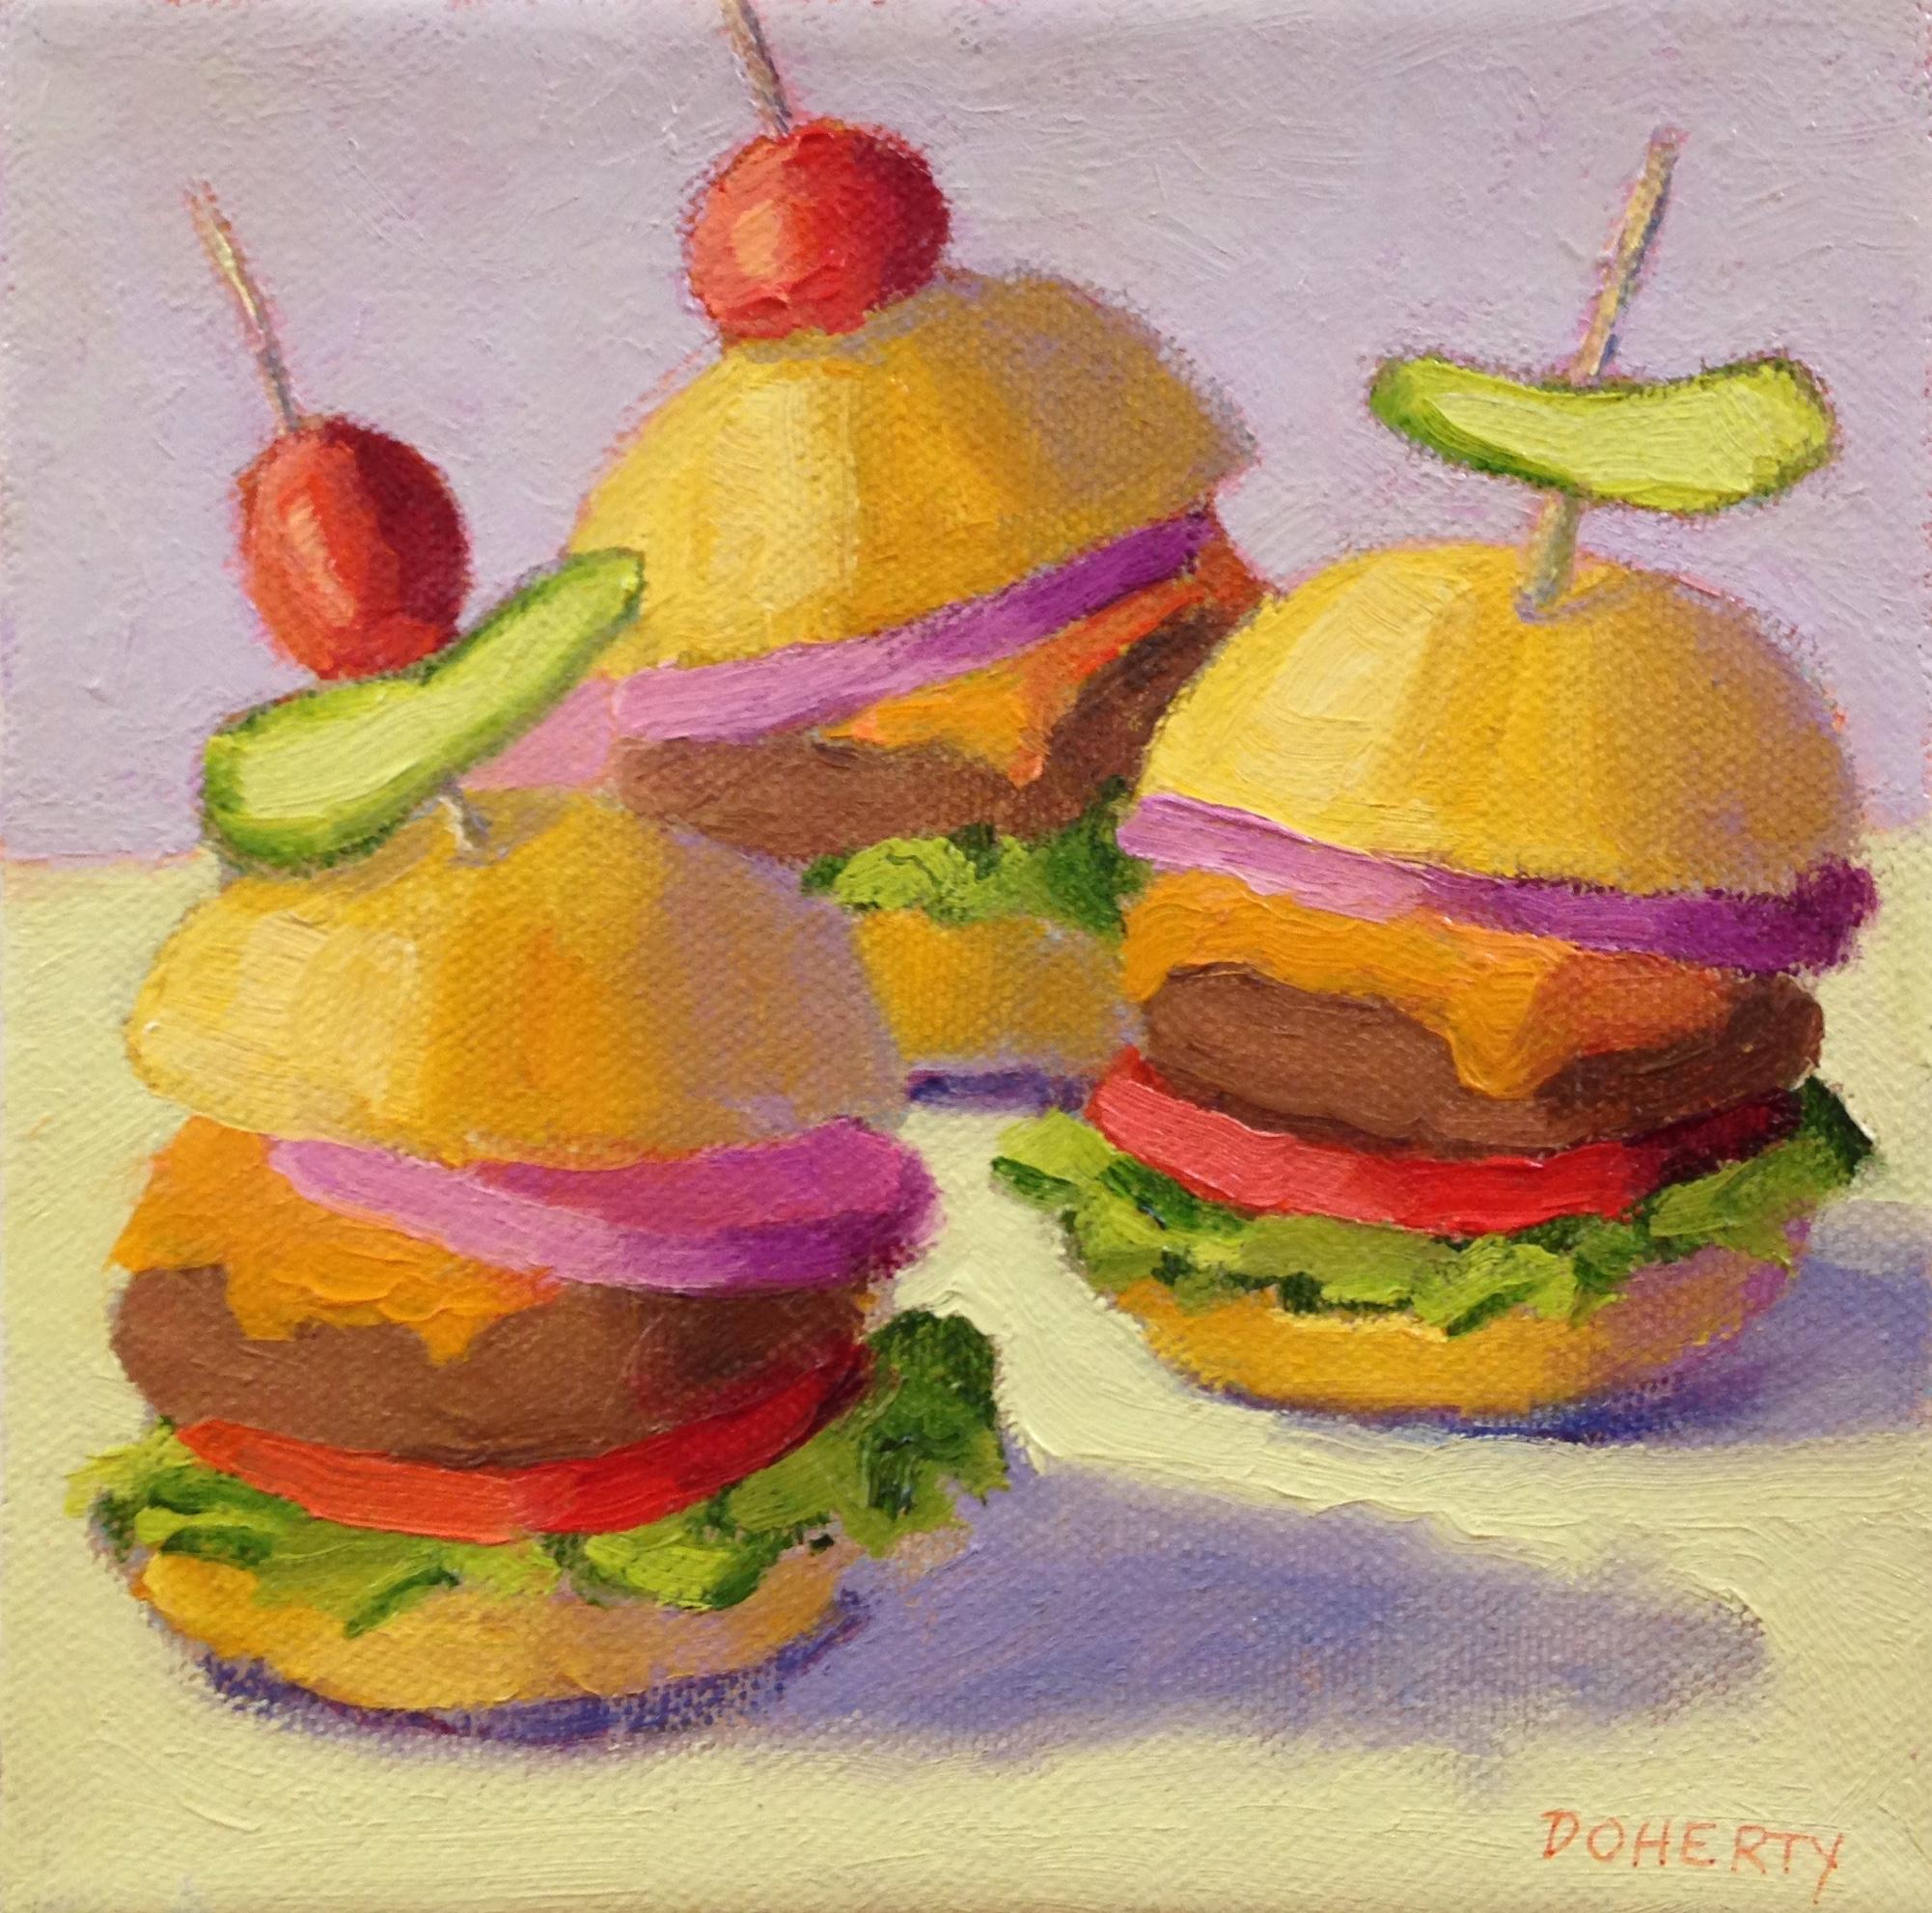 Pat Doherty Still-Life Painting - Sliders, Oil Painting